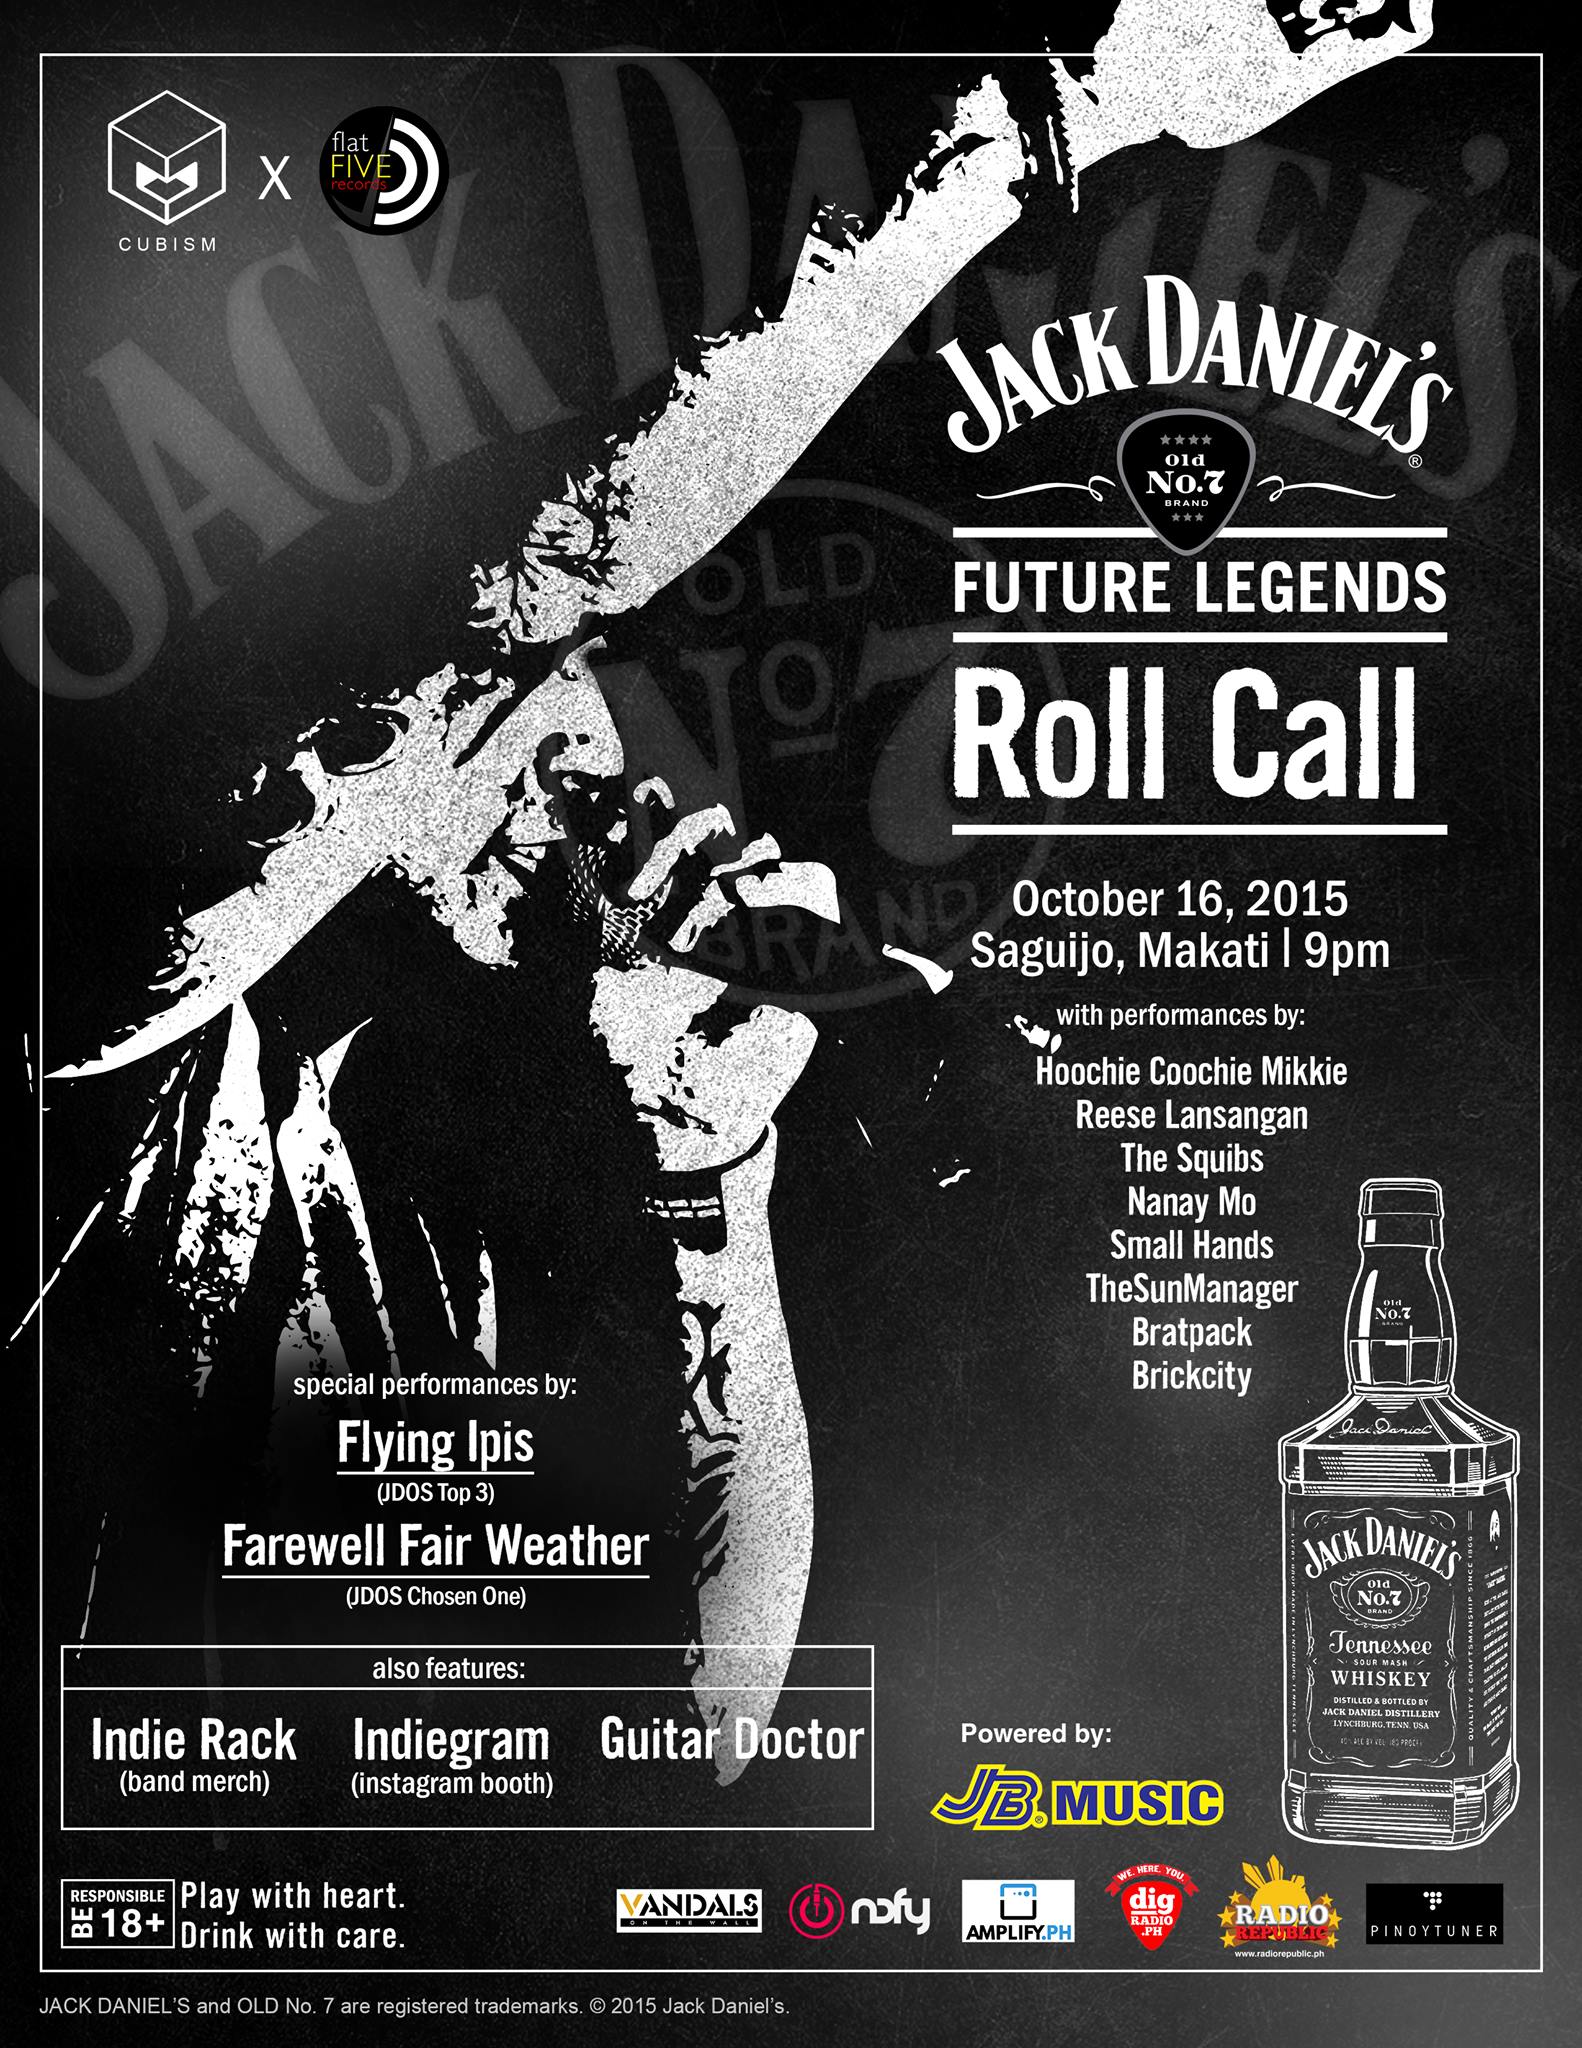 Cubism X Flatfiverecords X Revolver. JACK DANIELS ROLL CALL SESSIONS Friday, October 16 at 8:00pm Starts in about 18 hours Show Map saGuijo Cafe + Bar Events 7612 Guijo Street, San Antonio Village, 1203 Makati, Philippines Cubism Family x Flat Five Records ph and Revolver present THE JACK DANIELS FUTURE LEGENDS ROLL CALL SESSIONS BAND SMORGASBORD Featuring: Small Hands The Squibs Reese Lansangan Hoochie coochie mikkie TheSunManager Farewell Fair Weather Brickcity Flying Ipis Nanay Mo The Bratpack Simply comment on the event page and be there by 9PM to get in for free and 1 free jack coke!! #JDFutureLegendsPH